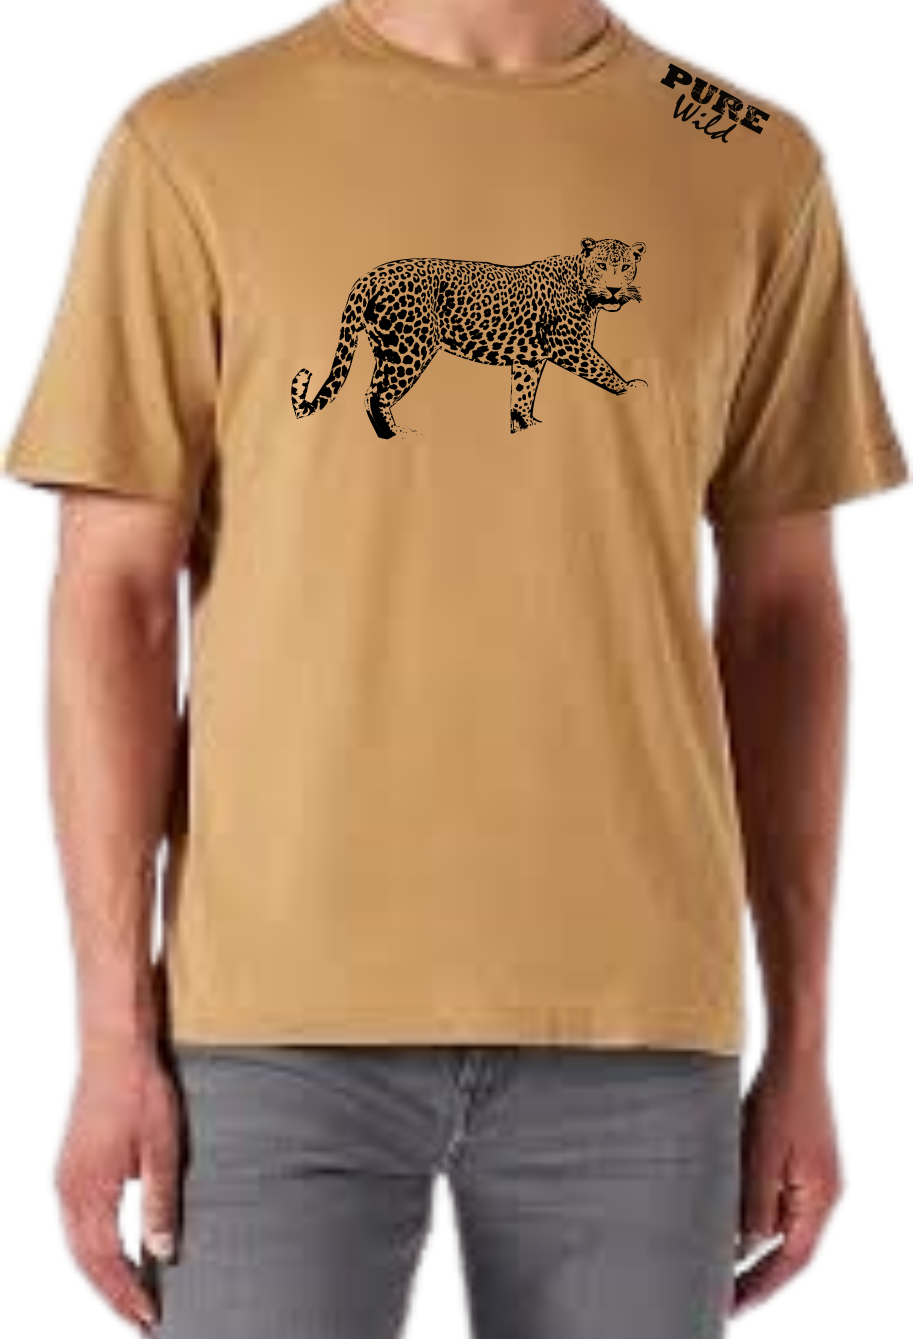 Leopard T-Shirt For A Real Man